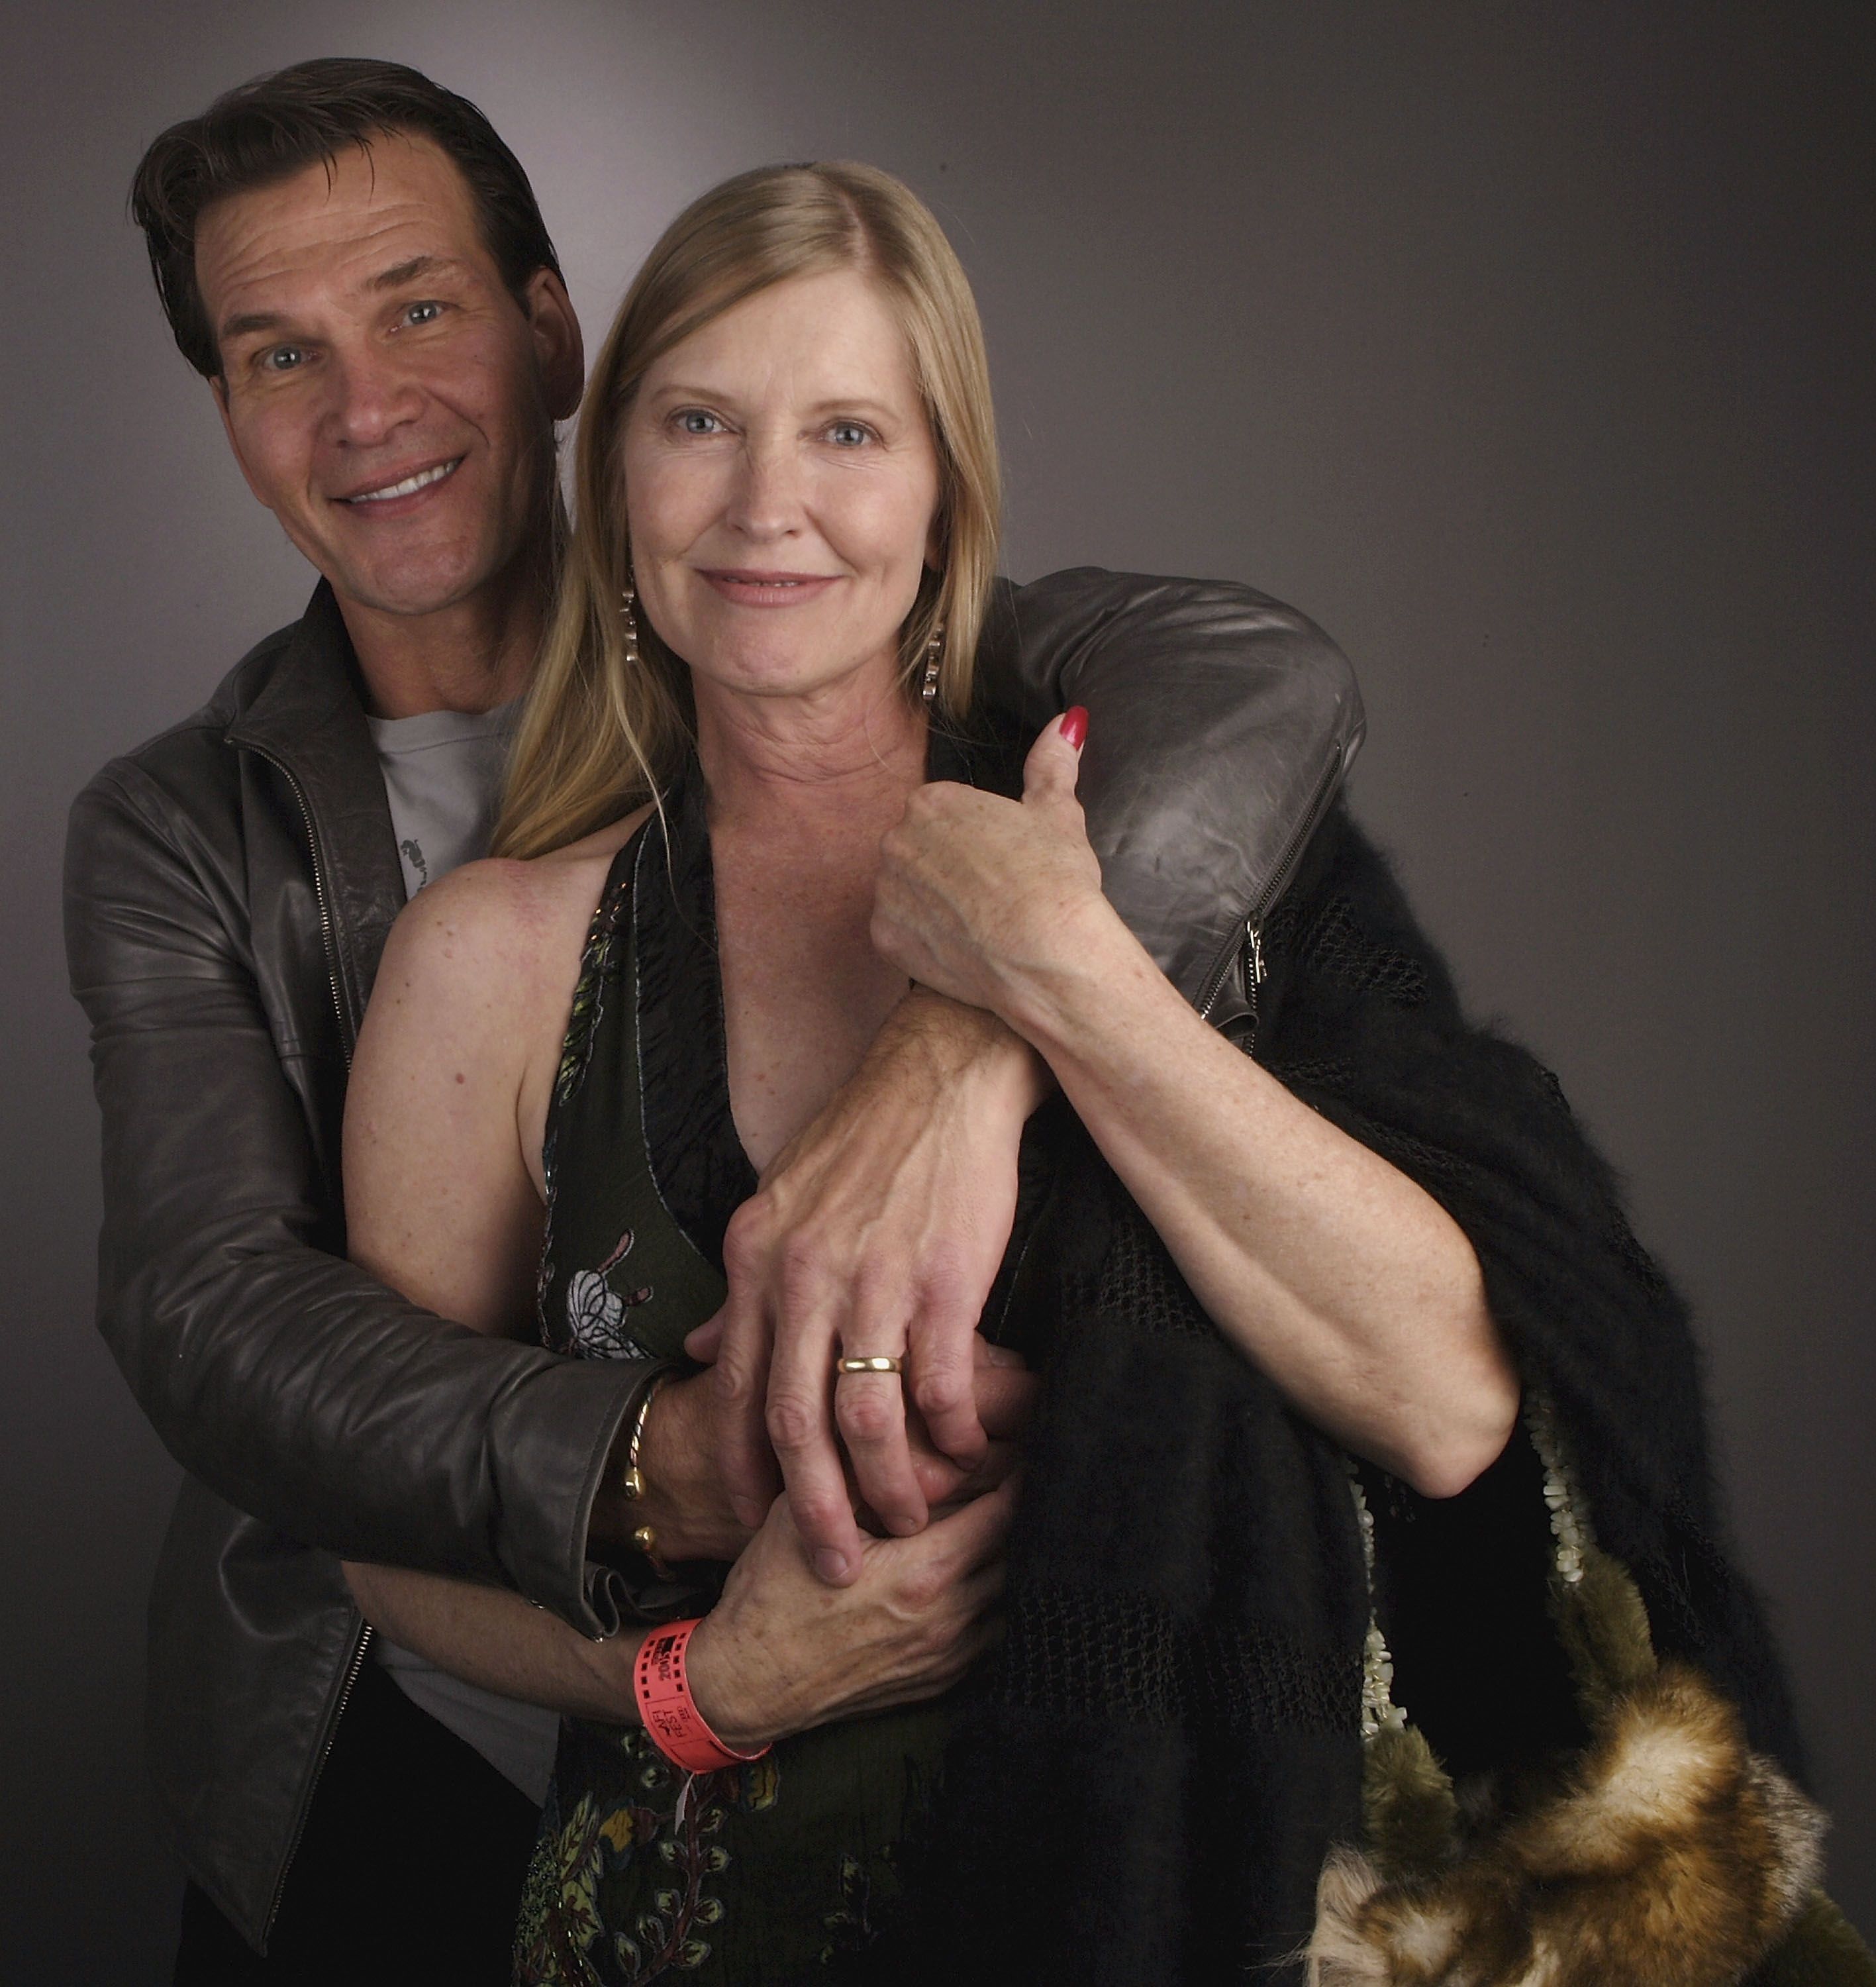 Patrick Swayze and his wife Lisa Niemi pose at the Portrait Studio during the AFI Fest on November 5, 2005, in Hollywood, California | Photo: Mark Mainz/Getty Images